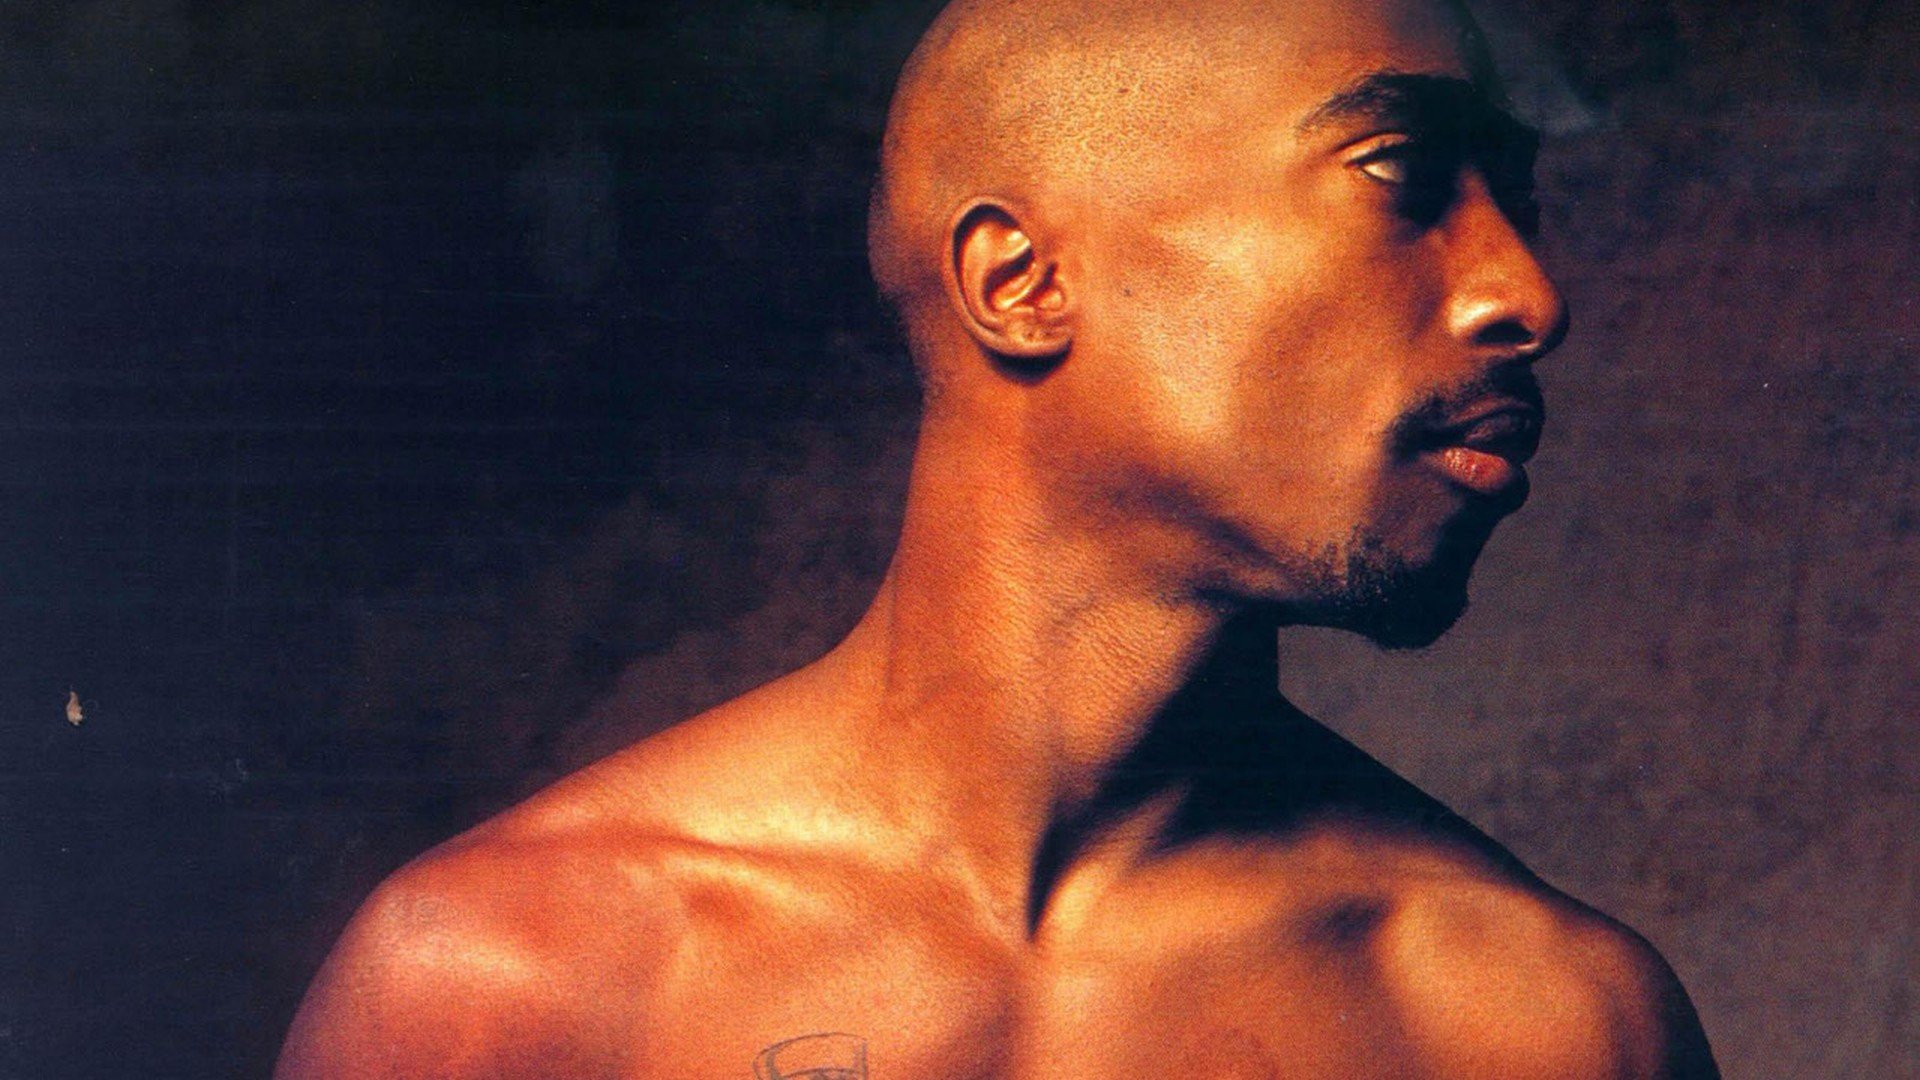 2pac Hd Wallpaper 1920x1080 2pac Hd Pictures toon